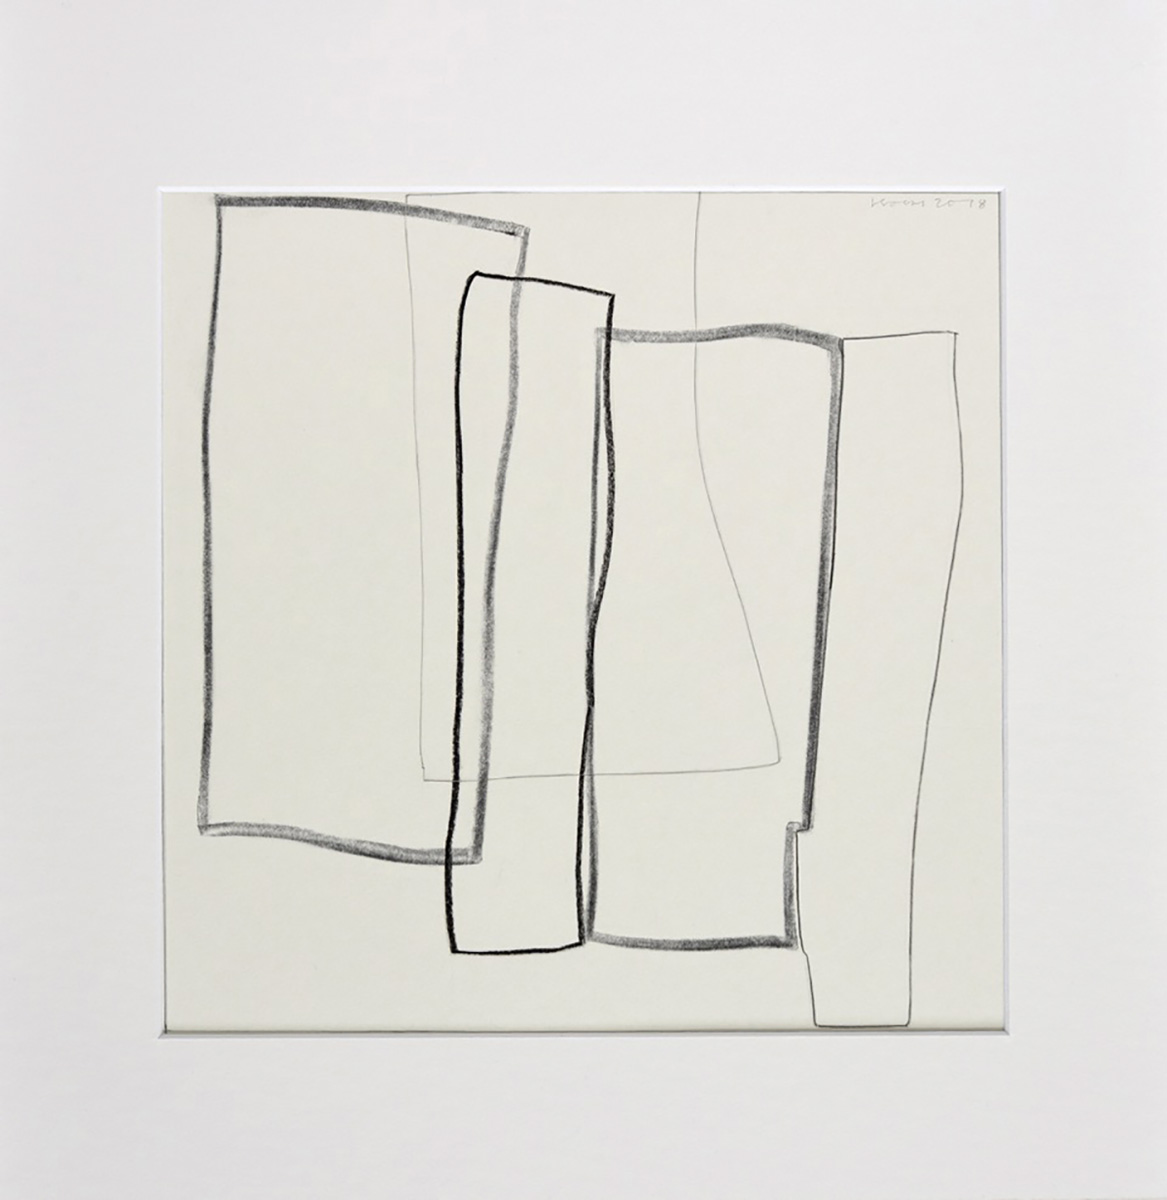 Ohne Titel, 201825 x 25 cmCharcoal, pencil on paper; framed in museum glass